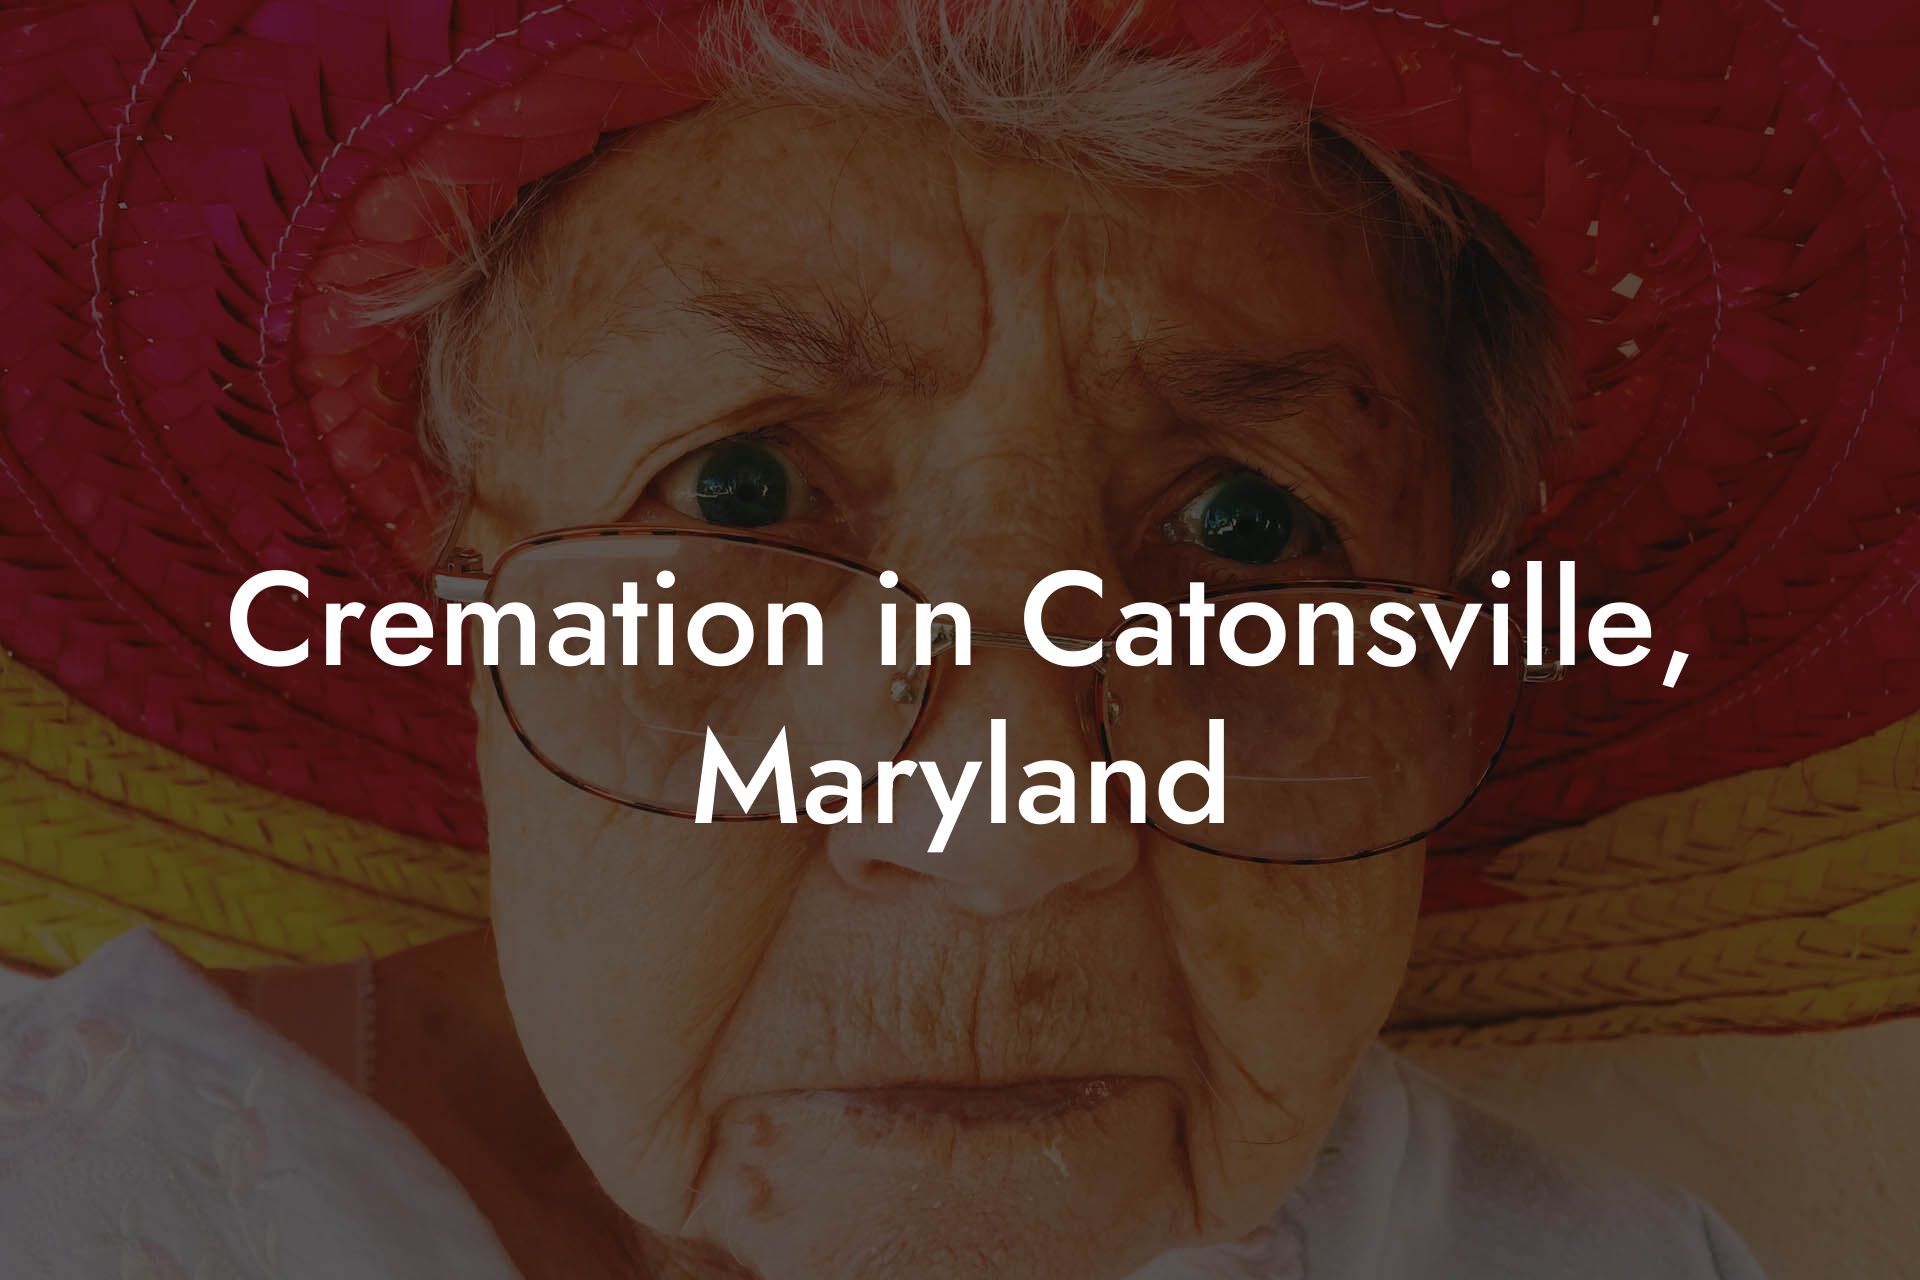 Cremation in Catonsville, Maryland